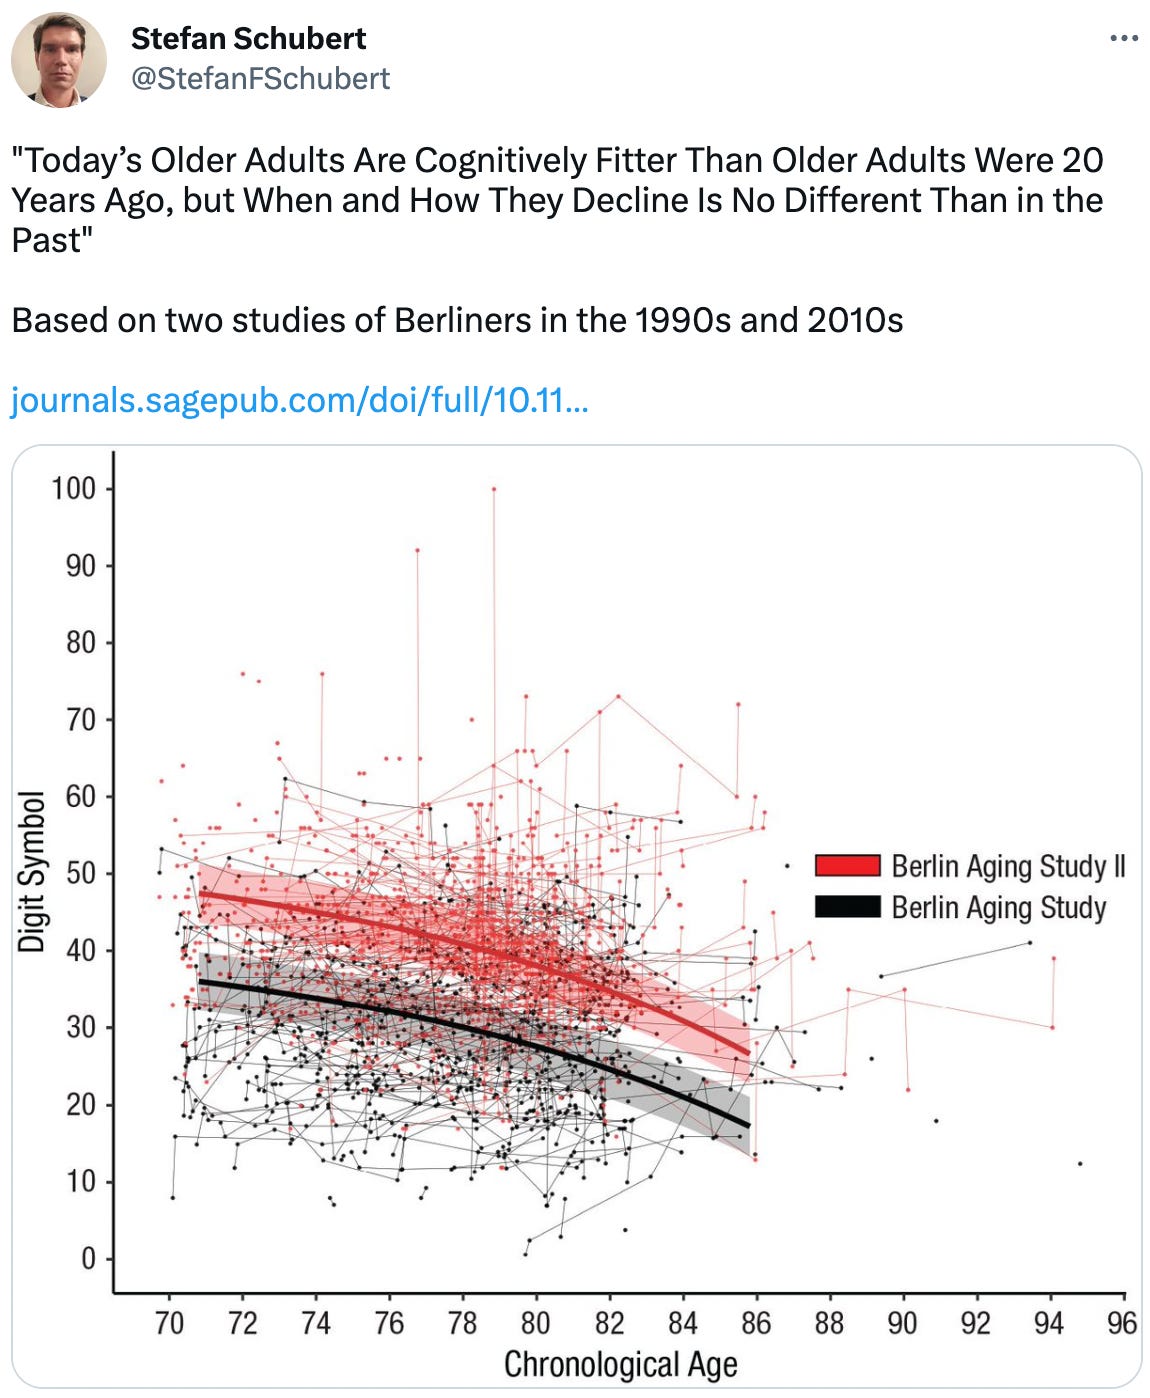  See new Tweets Conversation Stefan Schubert @StefanFSchubert "Today’s Older Adults Are Cognitively Fitter Than Older Adults Were 20 Years Ago, but When and How They Decline Is No Different Than in the Past"  Based on two studies of Berliners in the 1990s and 2010s